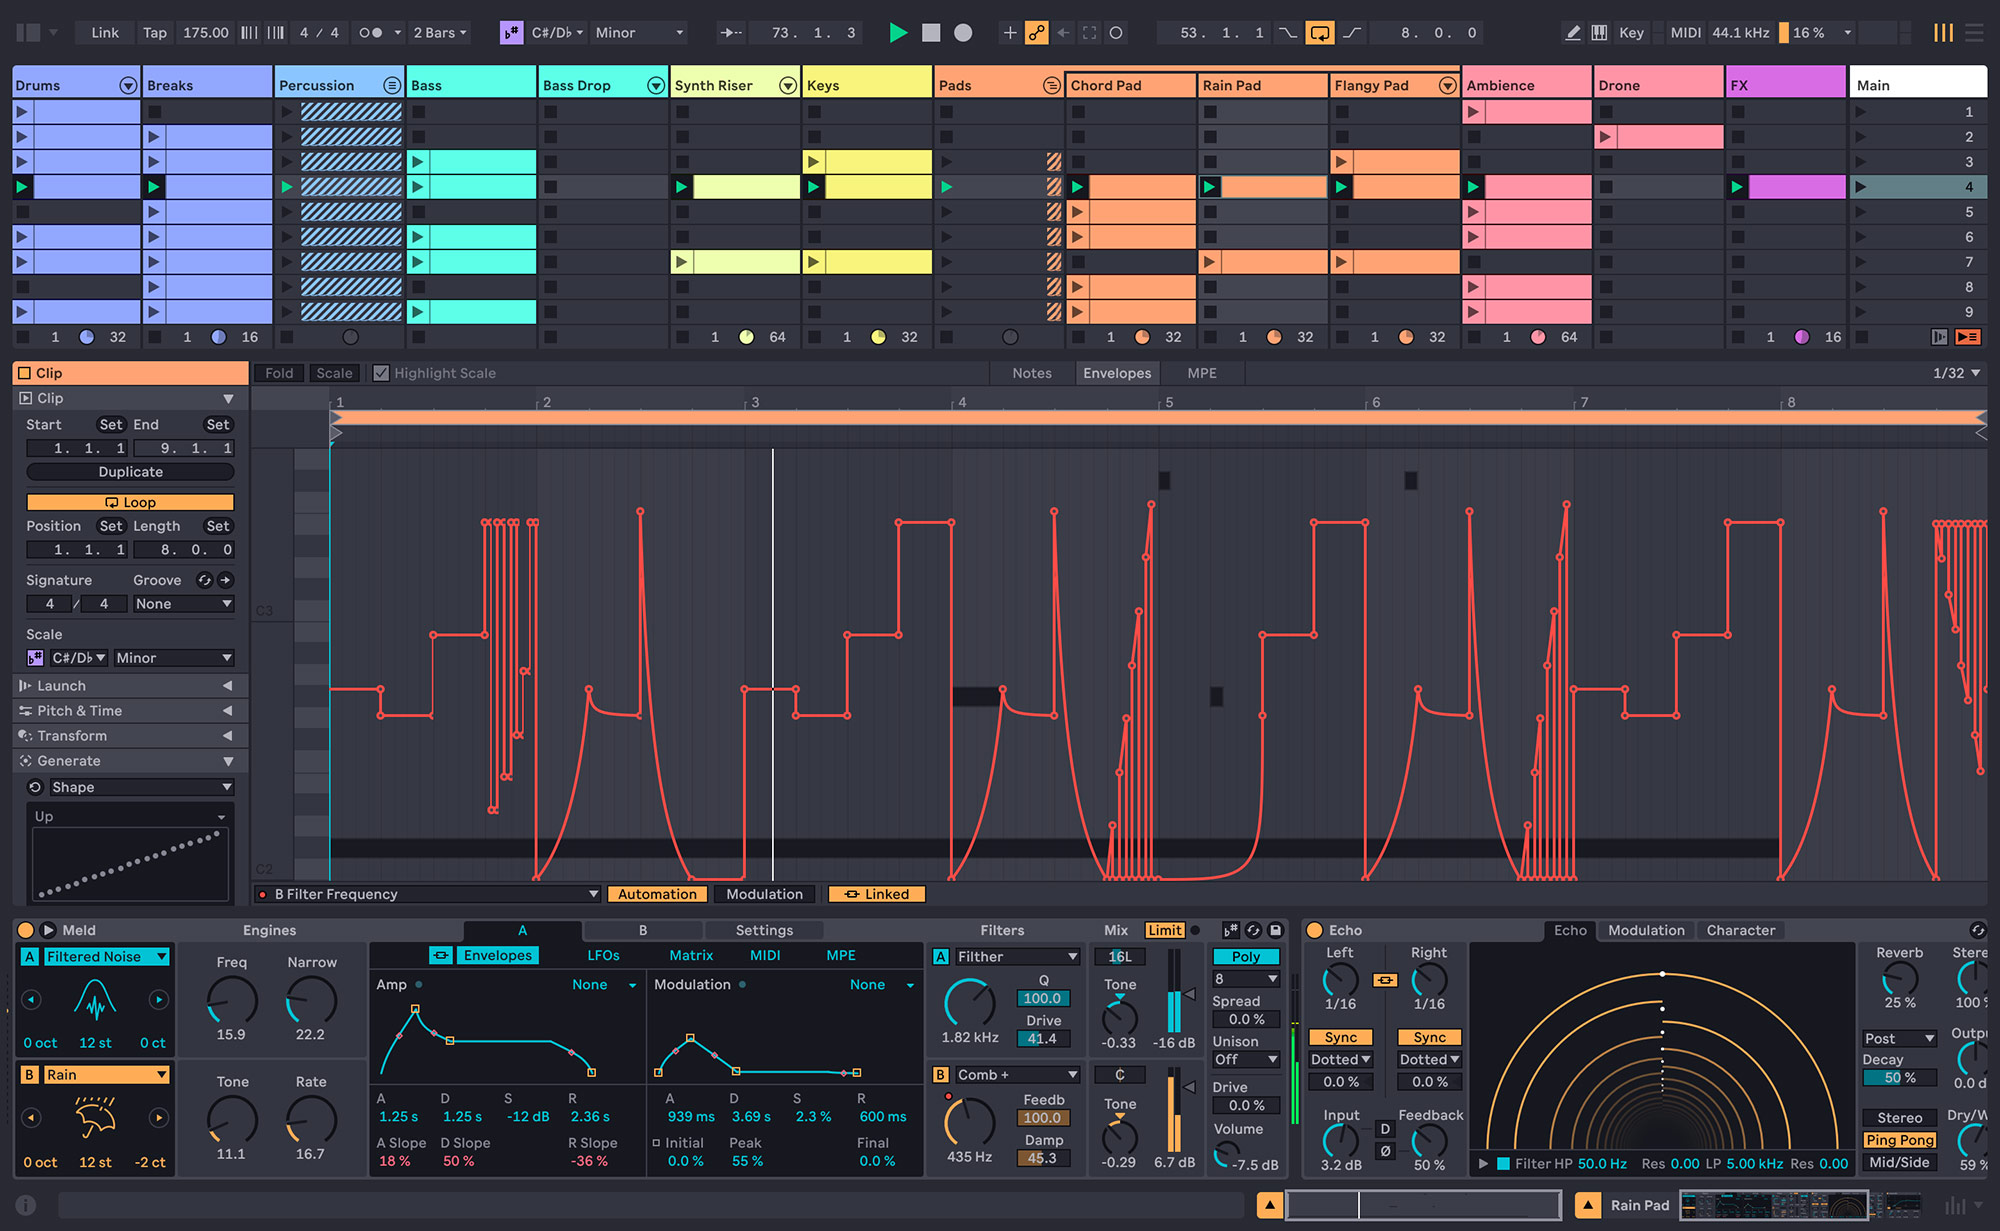 A screenshot of Ableton Live 12 showing the new Meld synthesizer.